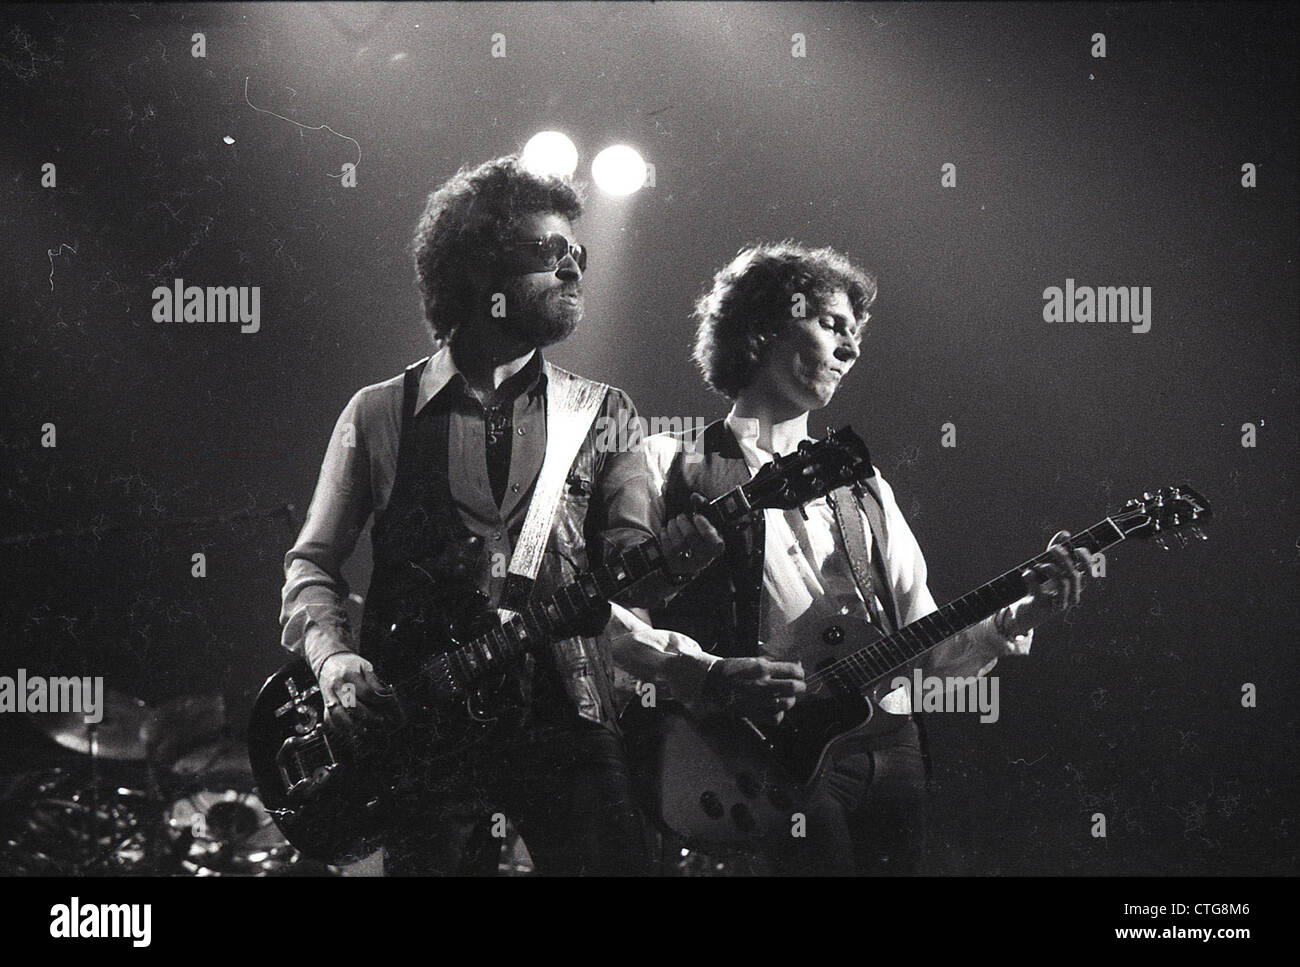 009820 - Eric Bloom and Buck Dharma of Blue Oyster Cult in concert in the 1970s Stock Photo